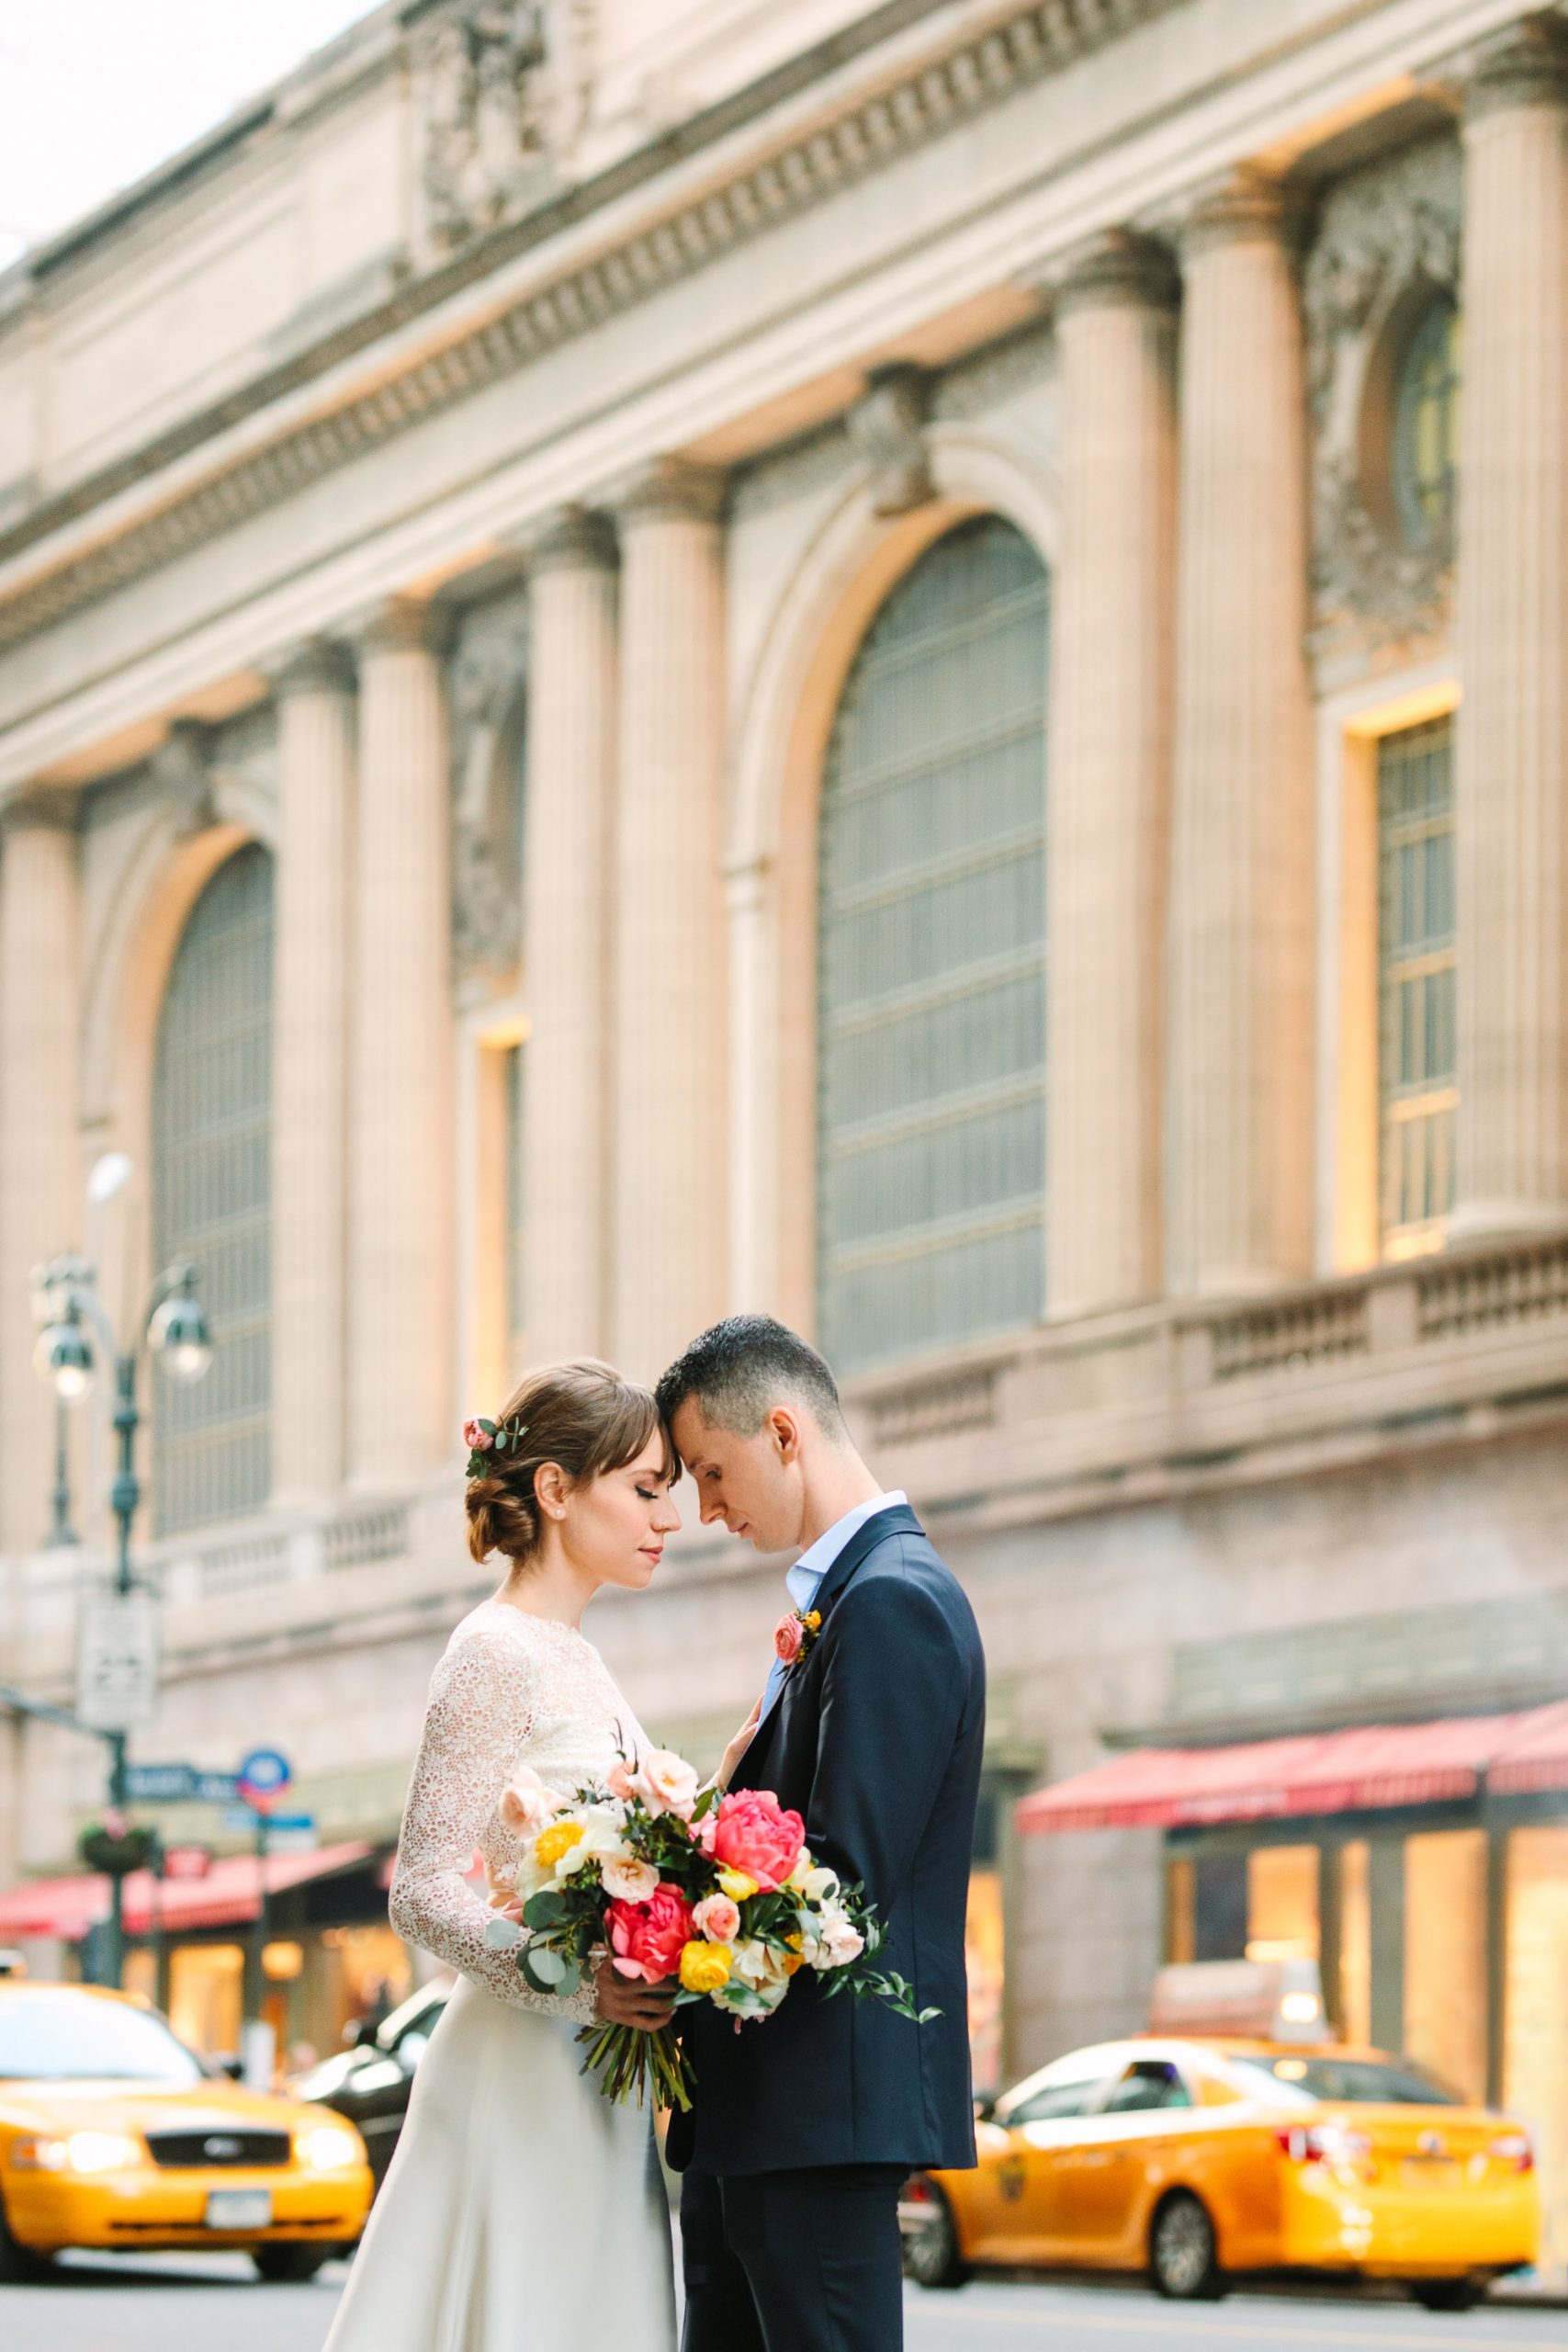 Bride and groom by NYC's Grand Central Station by Mary Costa Photography